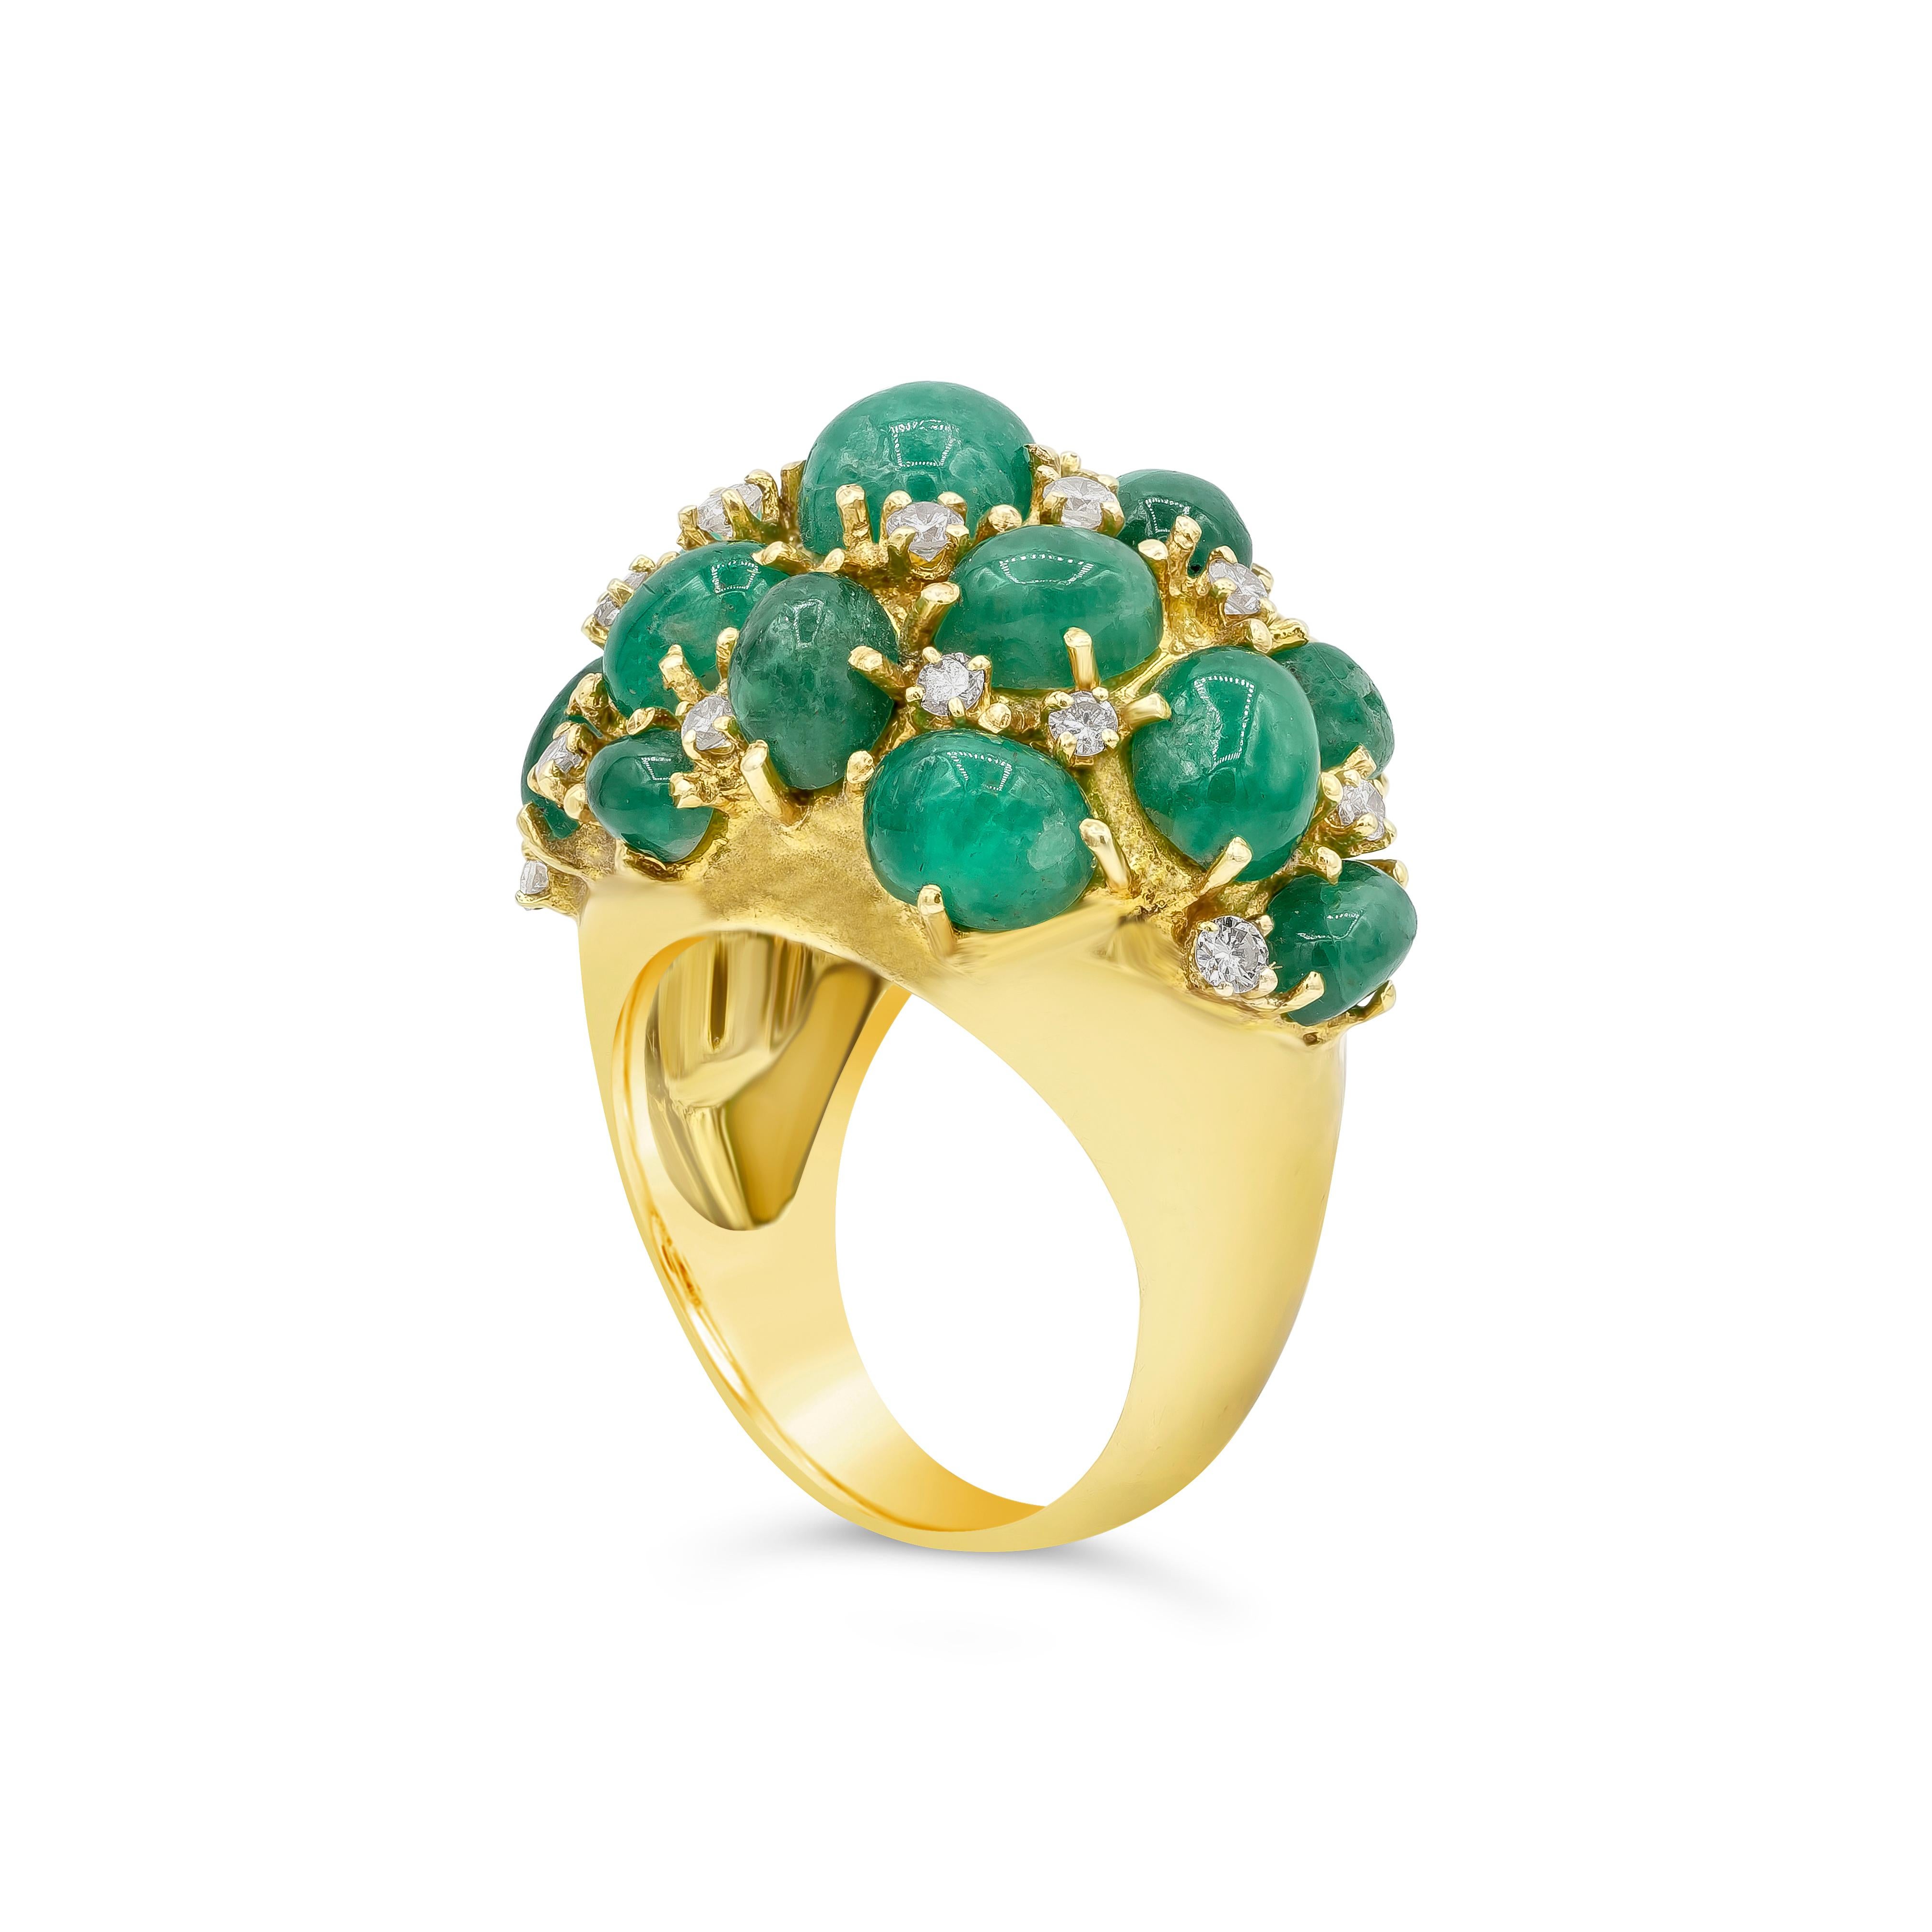 This uniquely designed fashion ring showcase 17 mixed cut emerald that weighs 15.00 total carats. Accented by 22 brilliant round diamonds that weighs 0.25 total carats. Made in 18 karats yellow gold. Size 7.5 US.